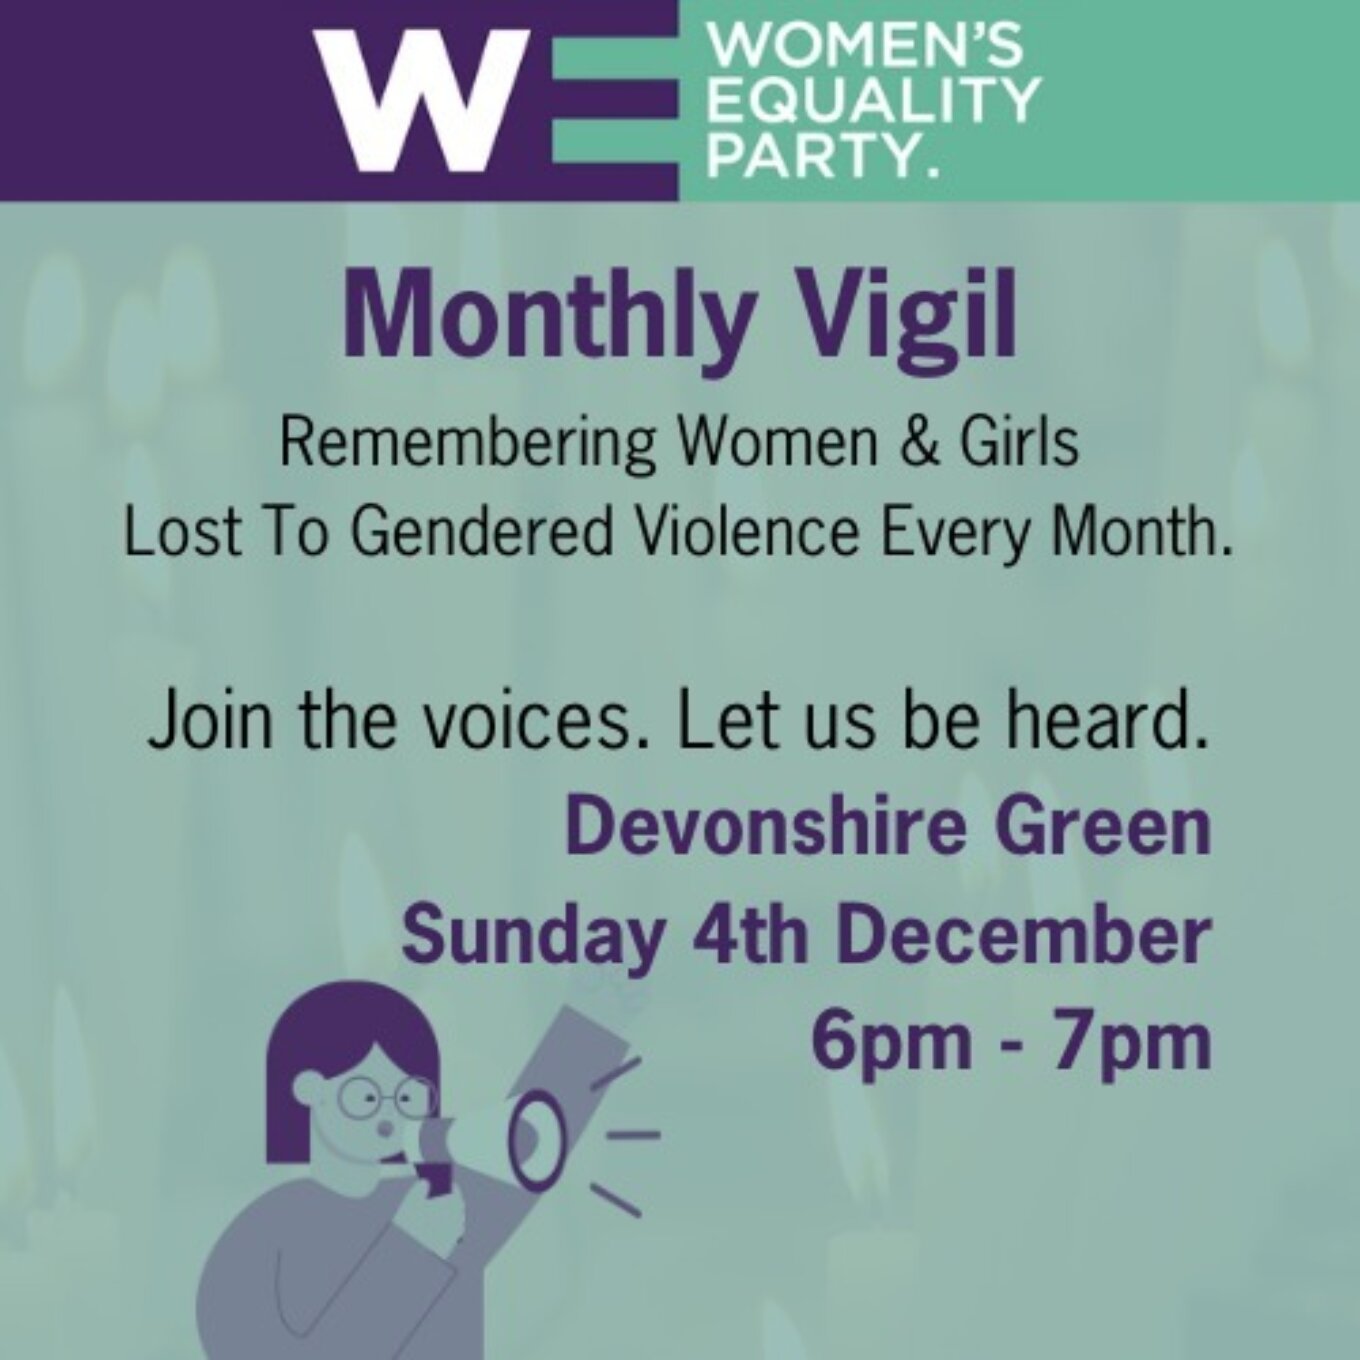 A poster for a monthly vigil remembering girls and women lost to gendered violence. 4th December, 6-7pm, Devonshire Green